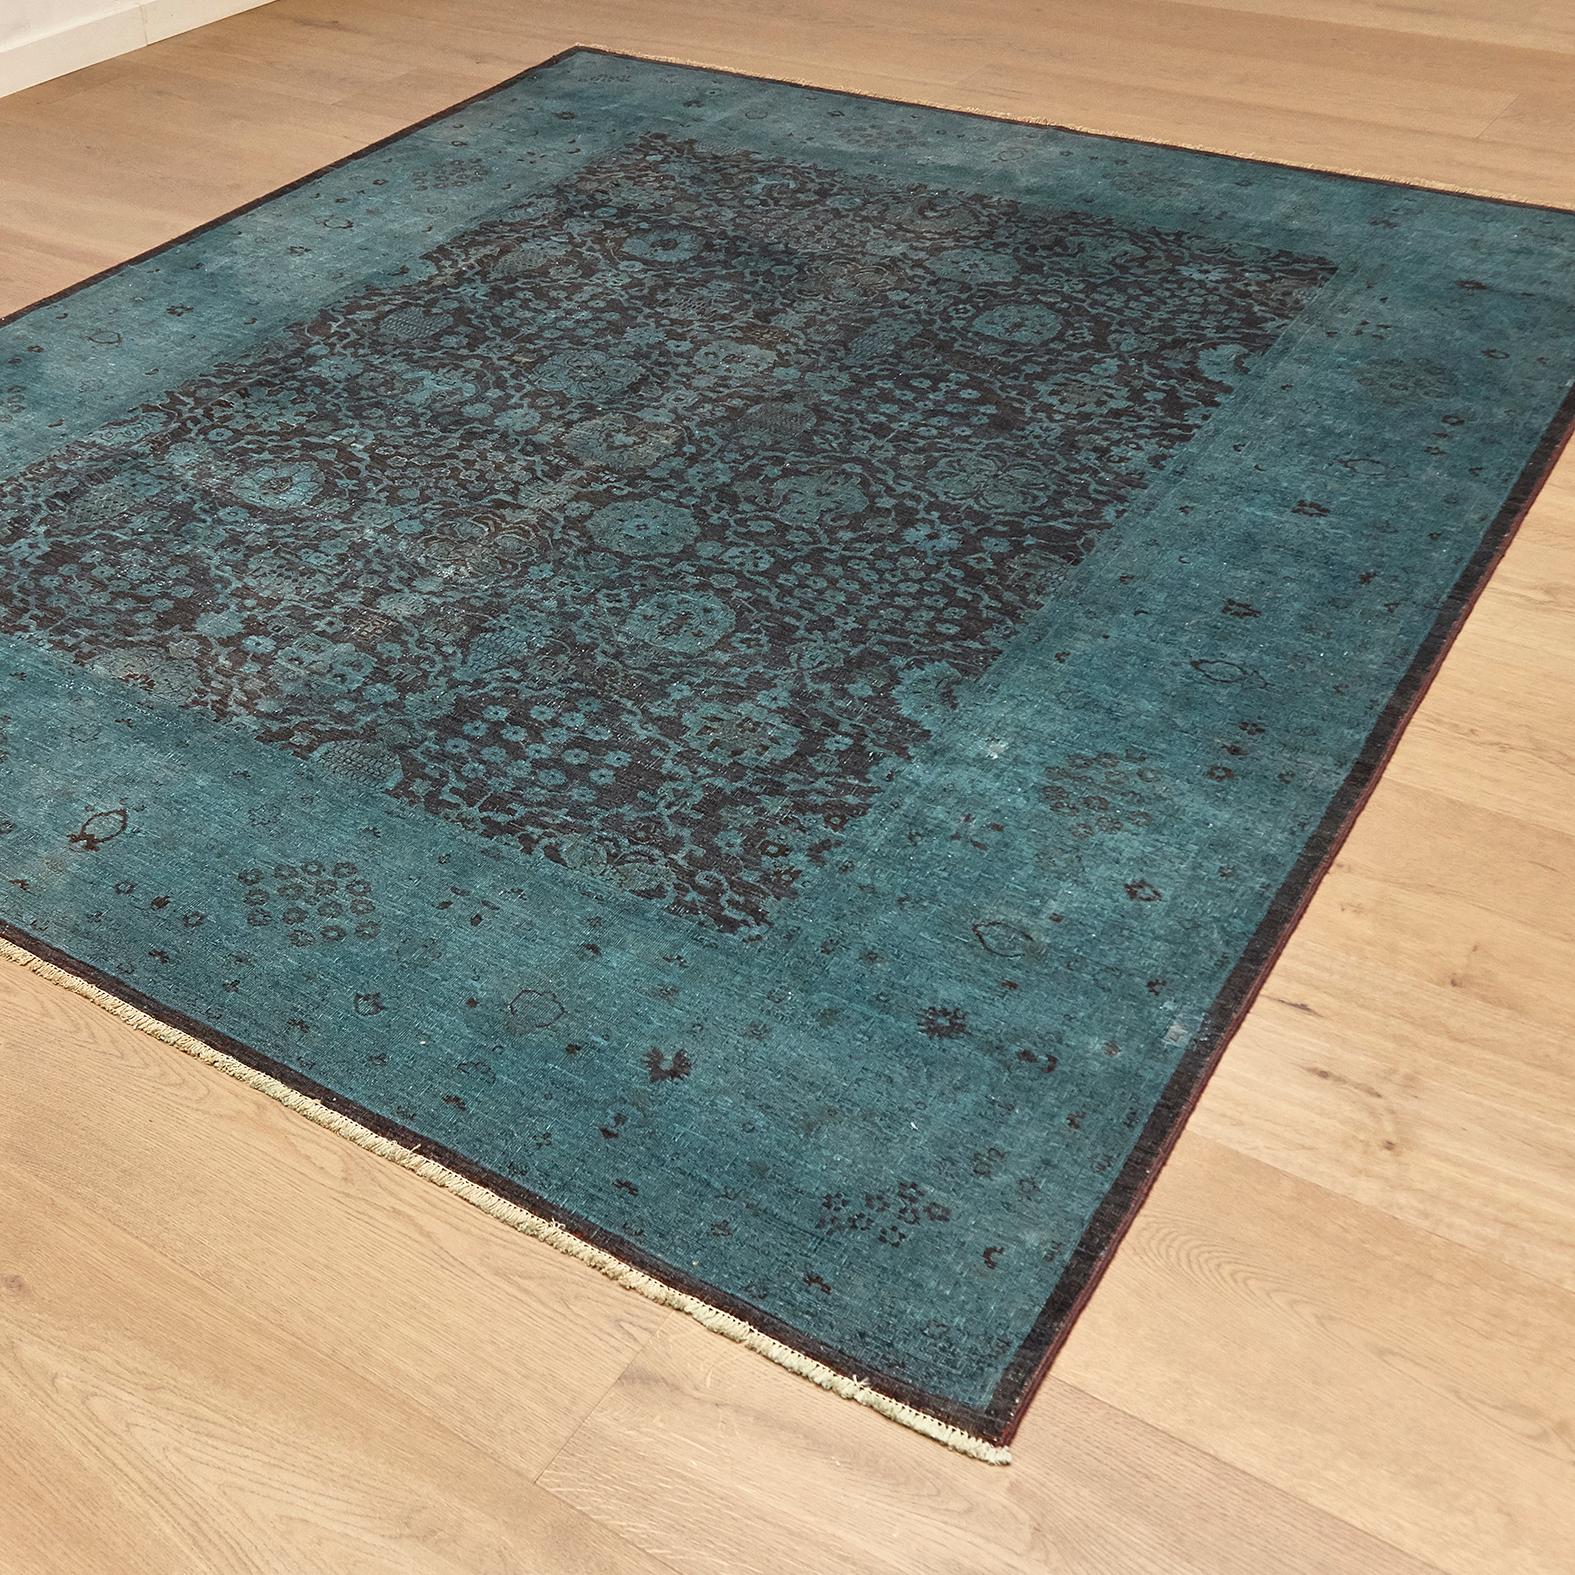 Anglo-Indian Ziegler Pakistan Large Rug Stone Washed, Wool Hand Knotted Blue, circa 2000